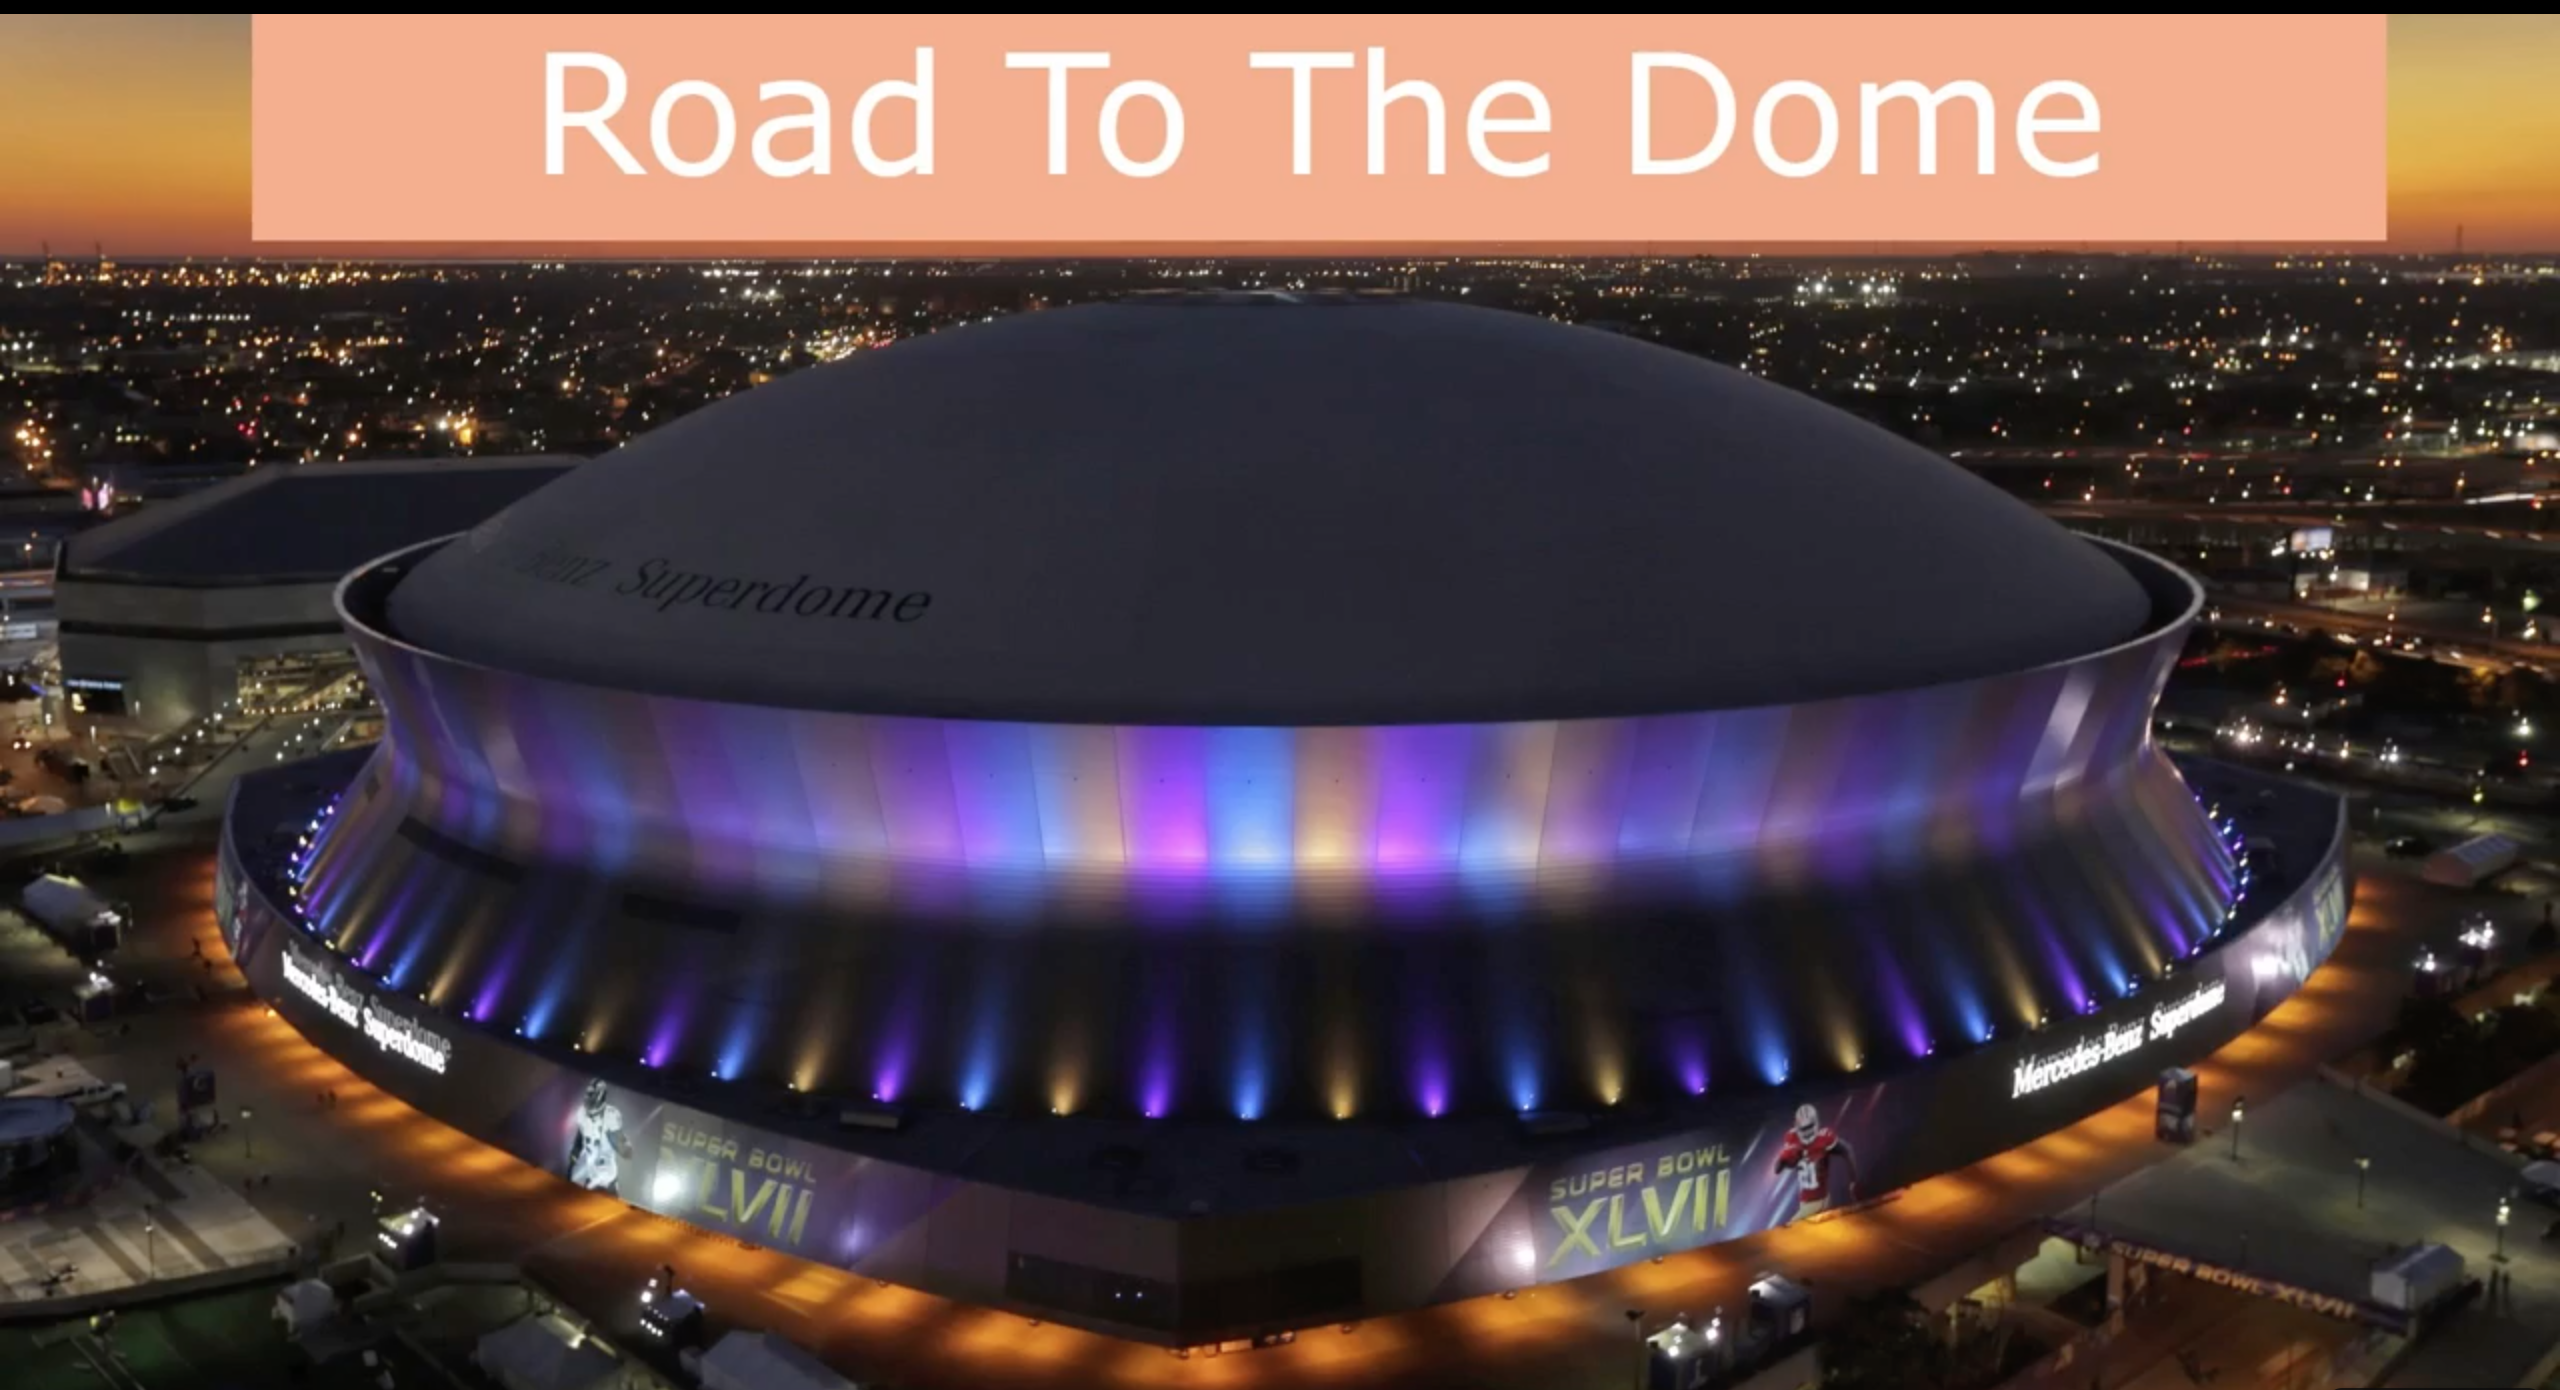 The Road To The Dome Show (Quarterfinals Edition)